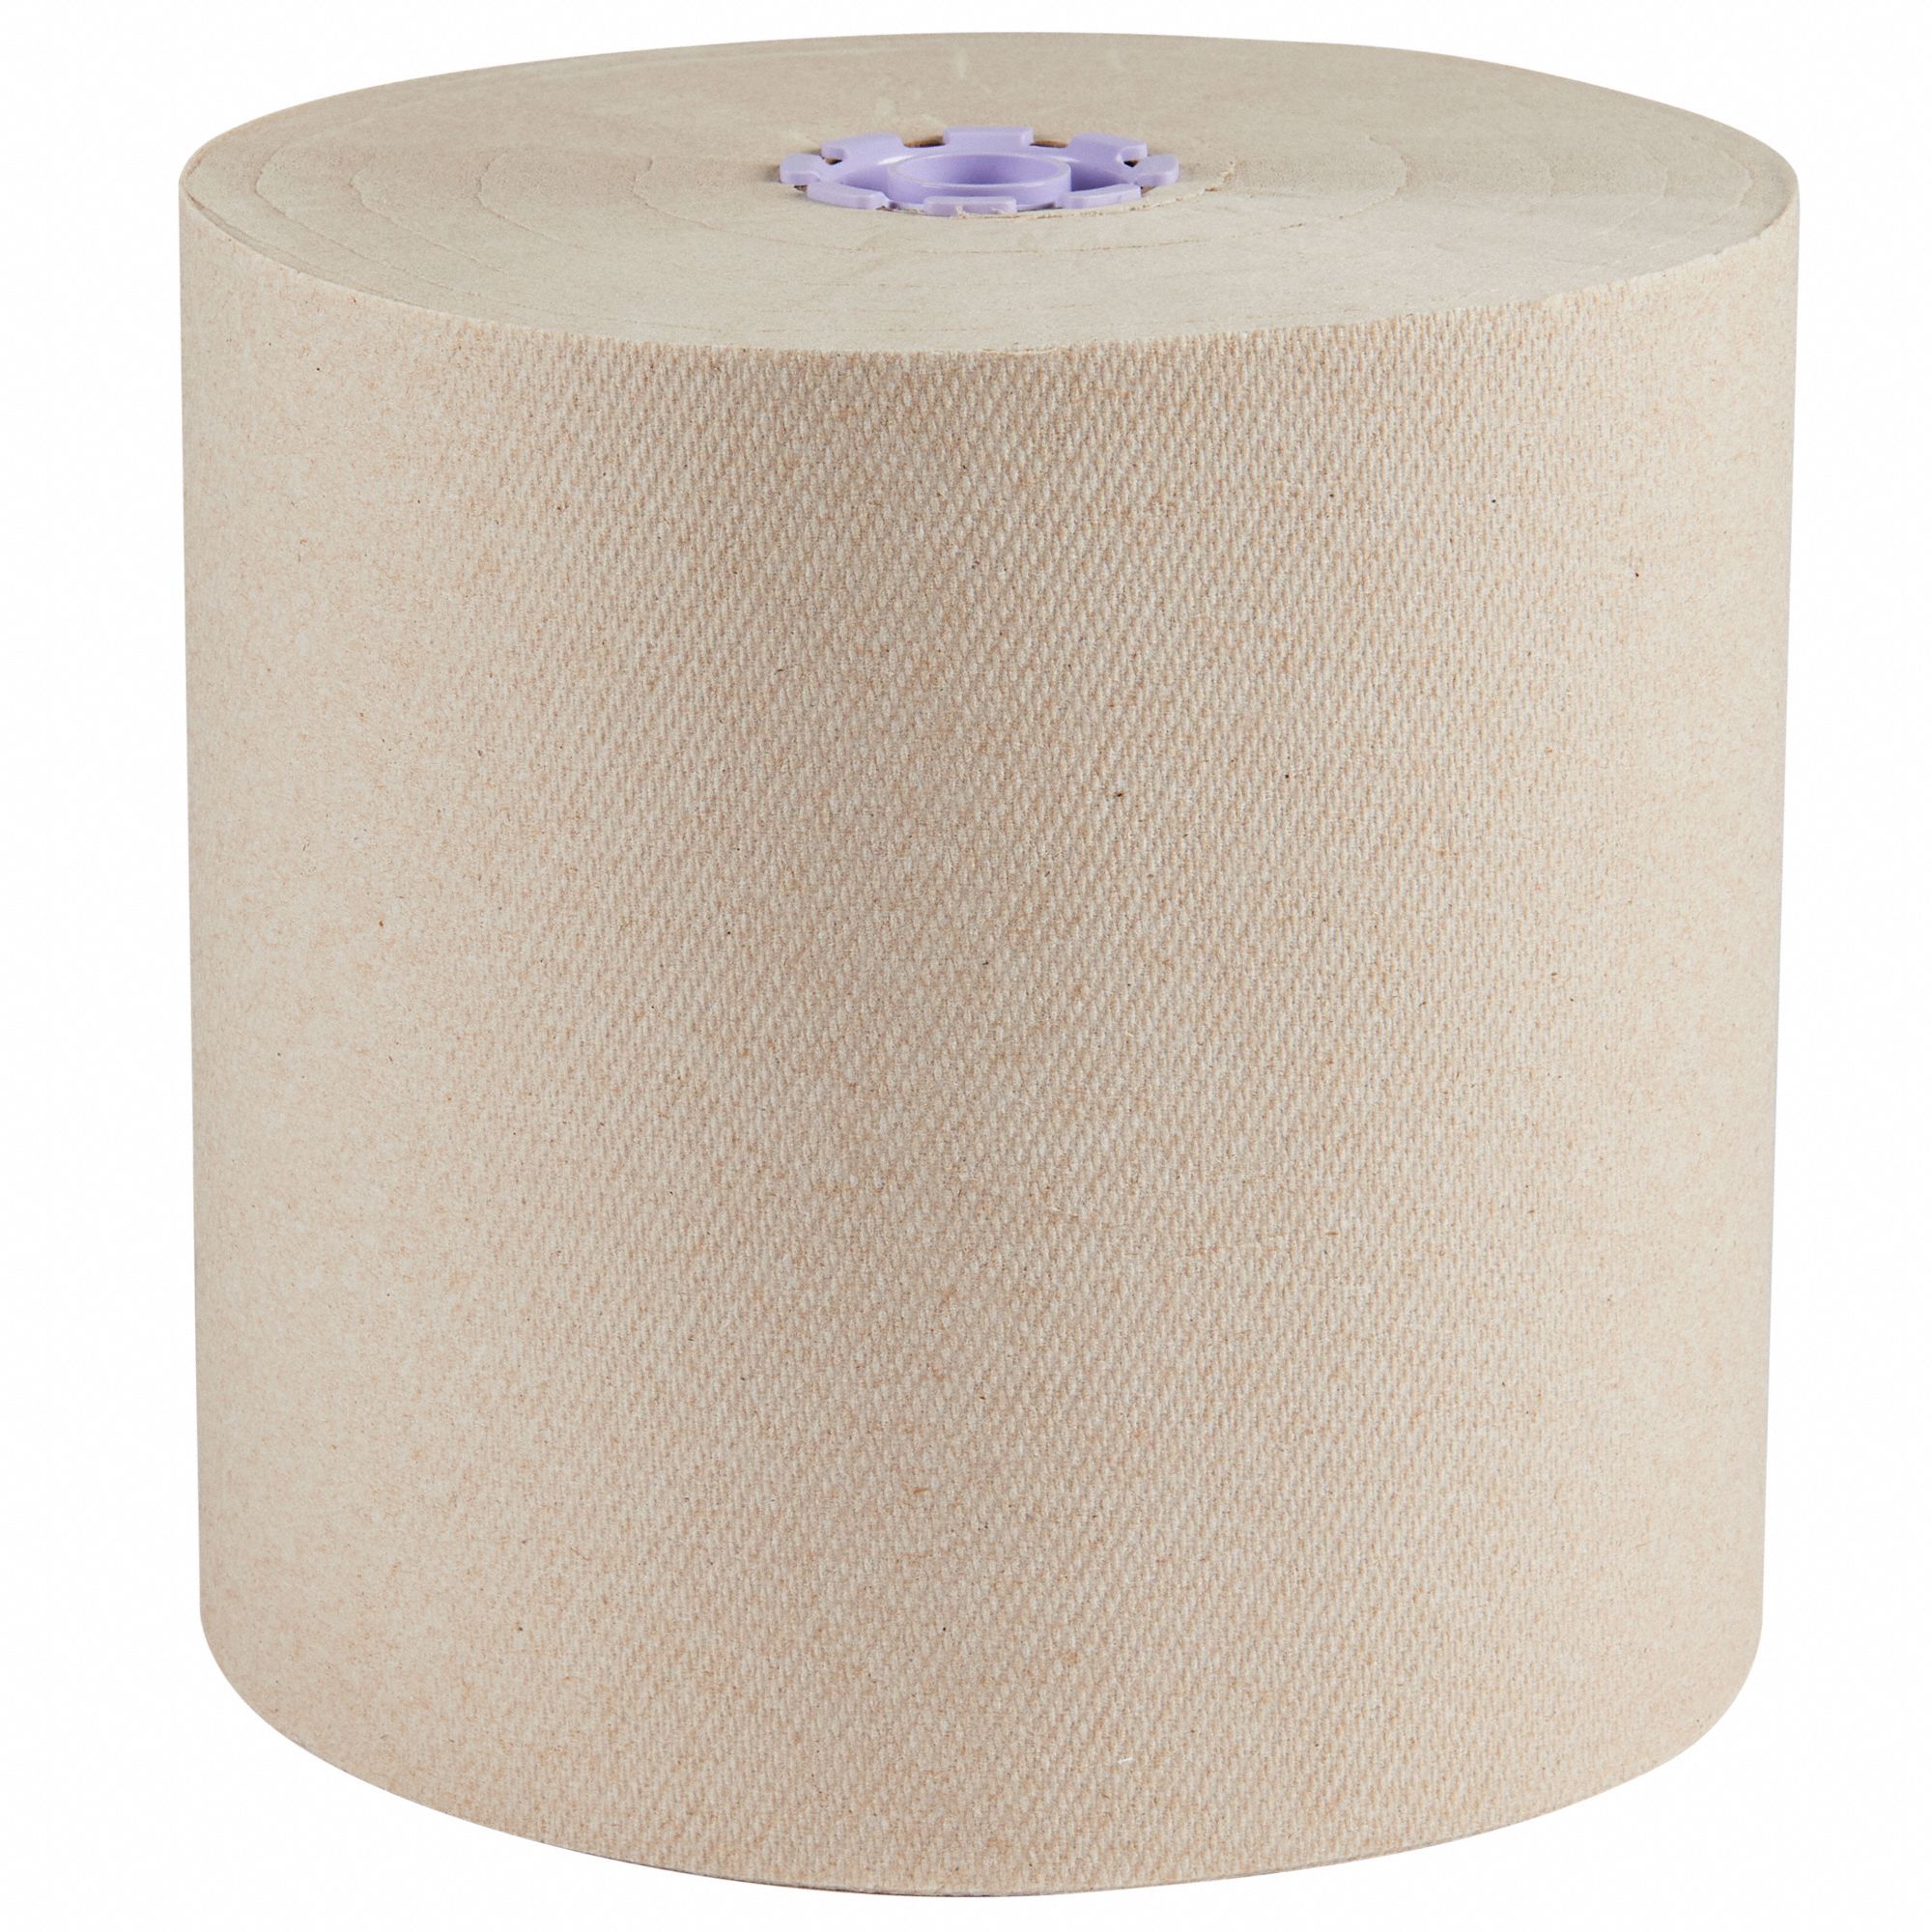 Paper Towel Roll: Brown, 8 in Roll Wd, 700 ft Roll Lg, 12 in Sheet Lg, Hardwound, 6 PK